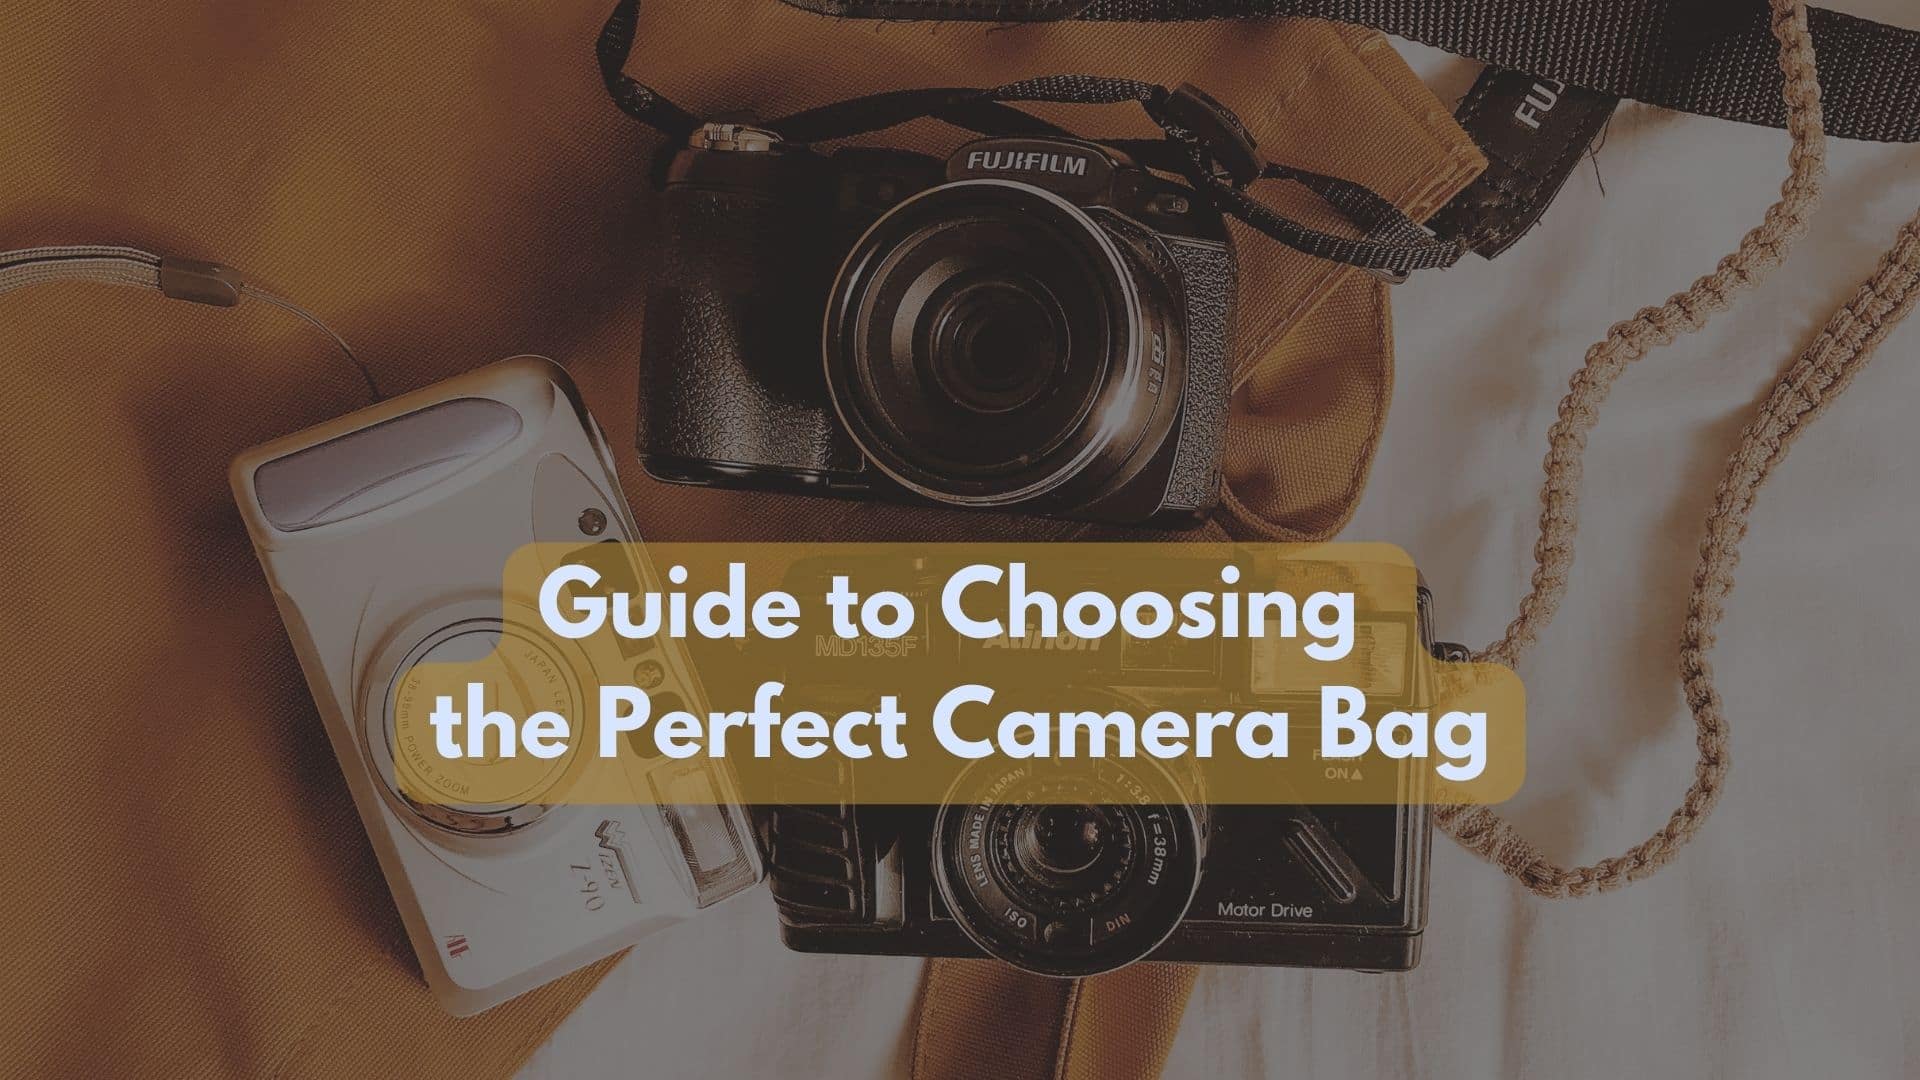 The Ultimate Guide to Choosing the Perfect Camera Bag